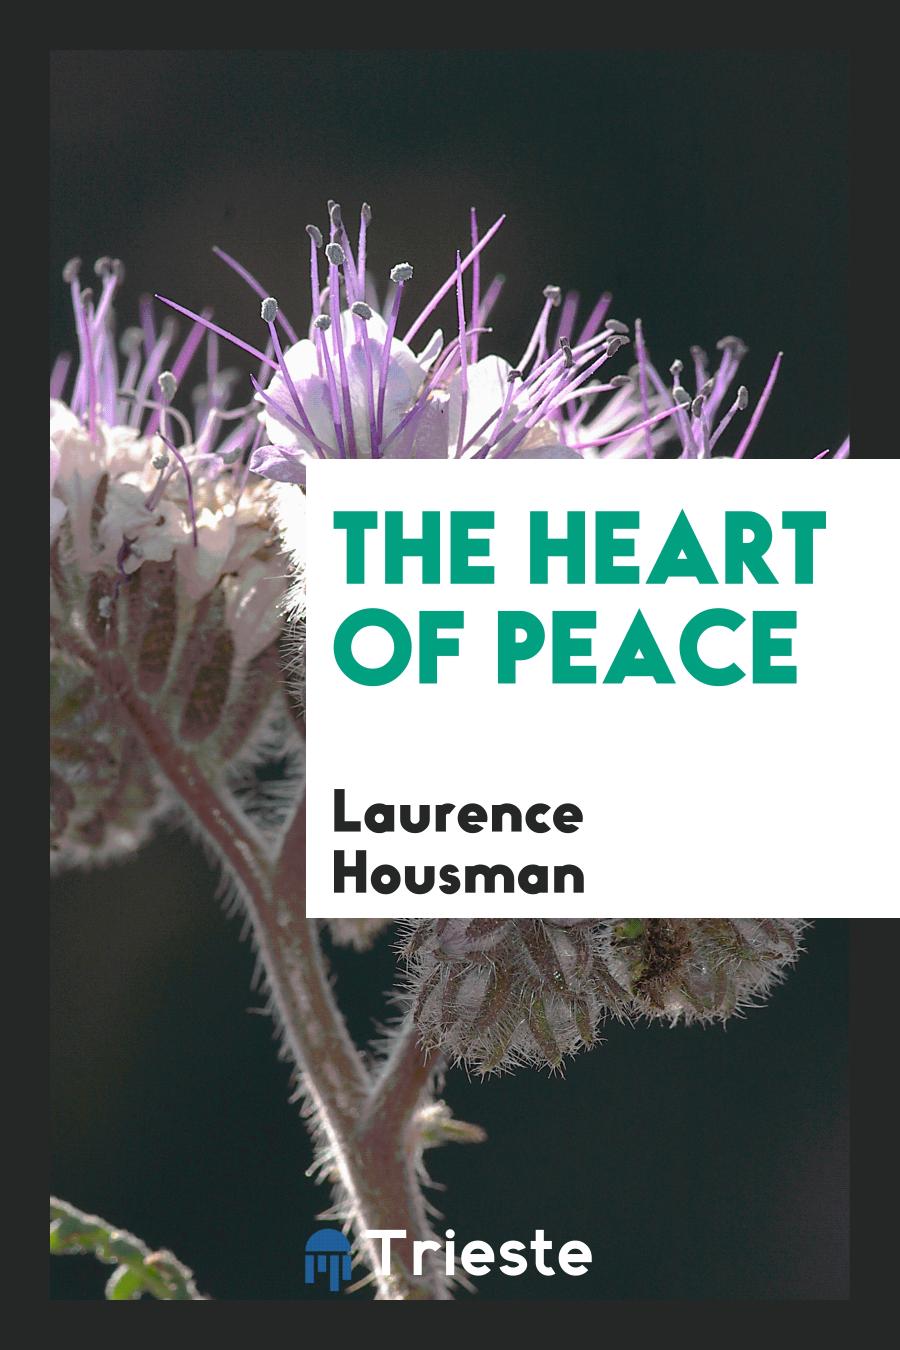 The Heart of Peace